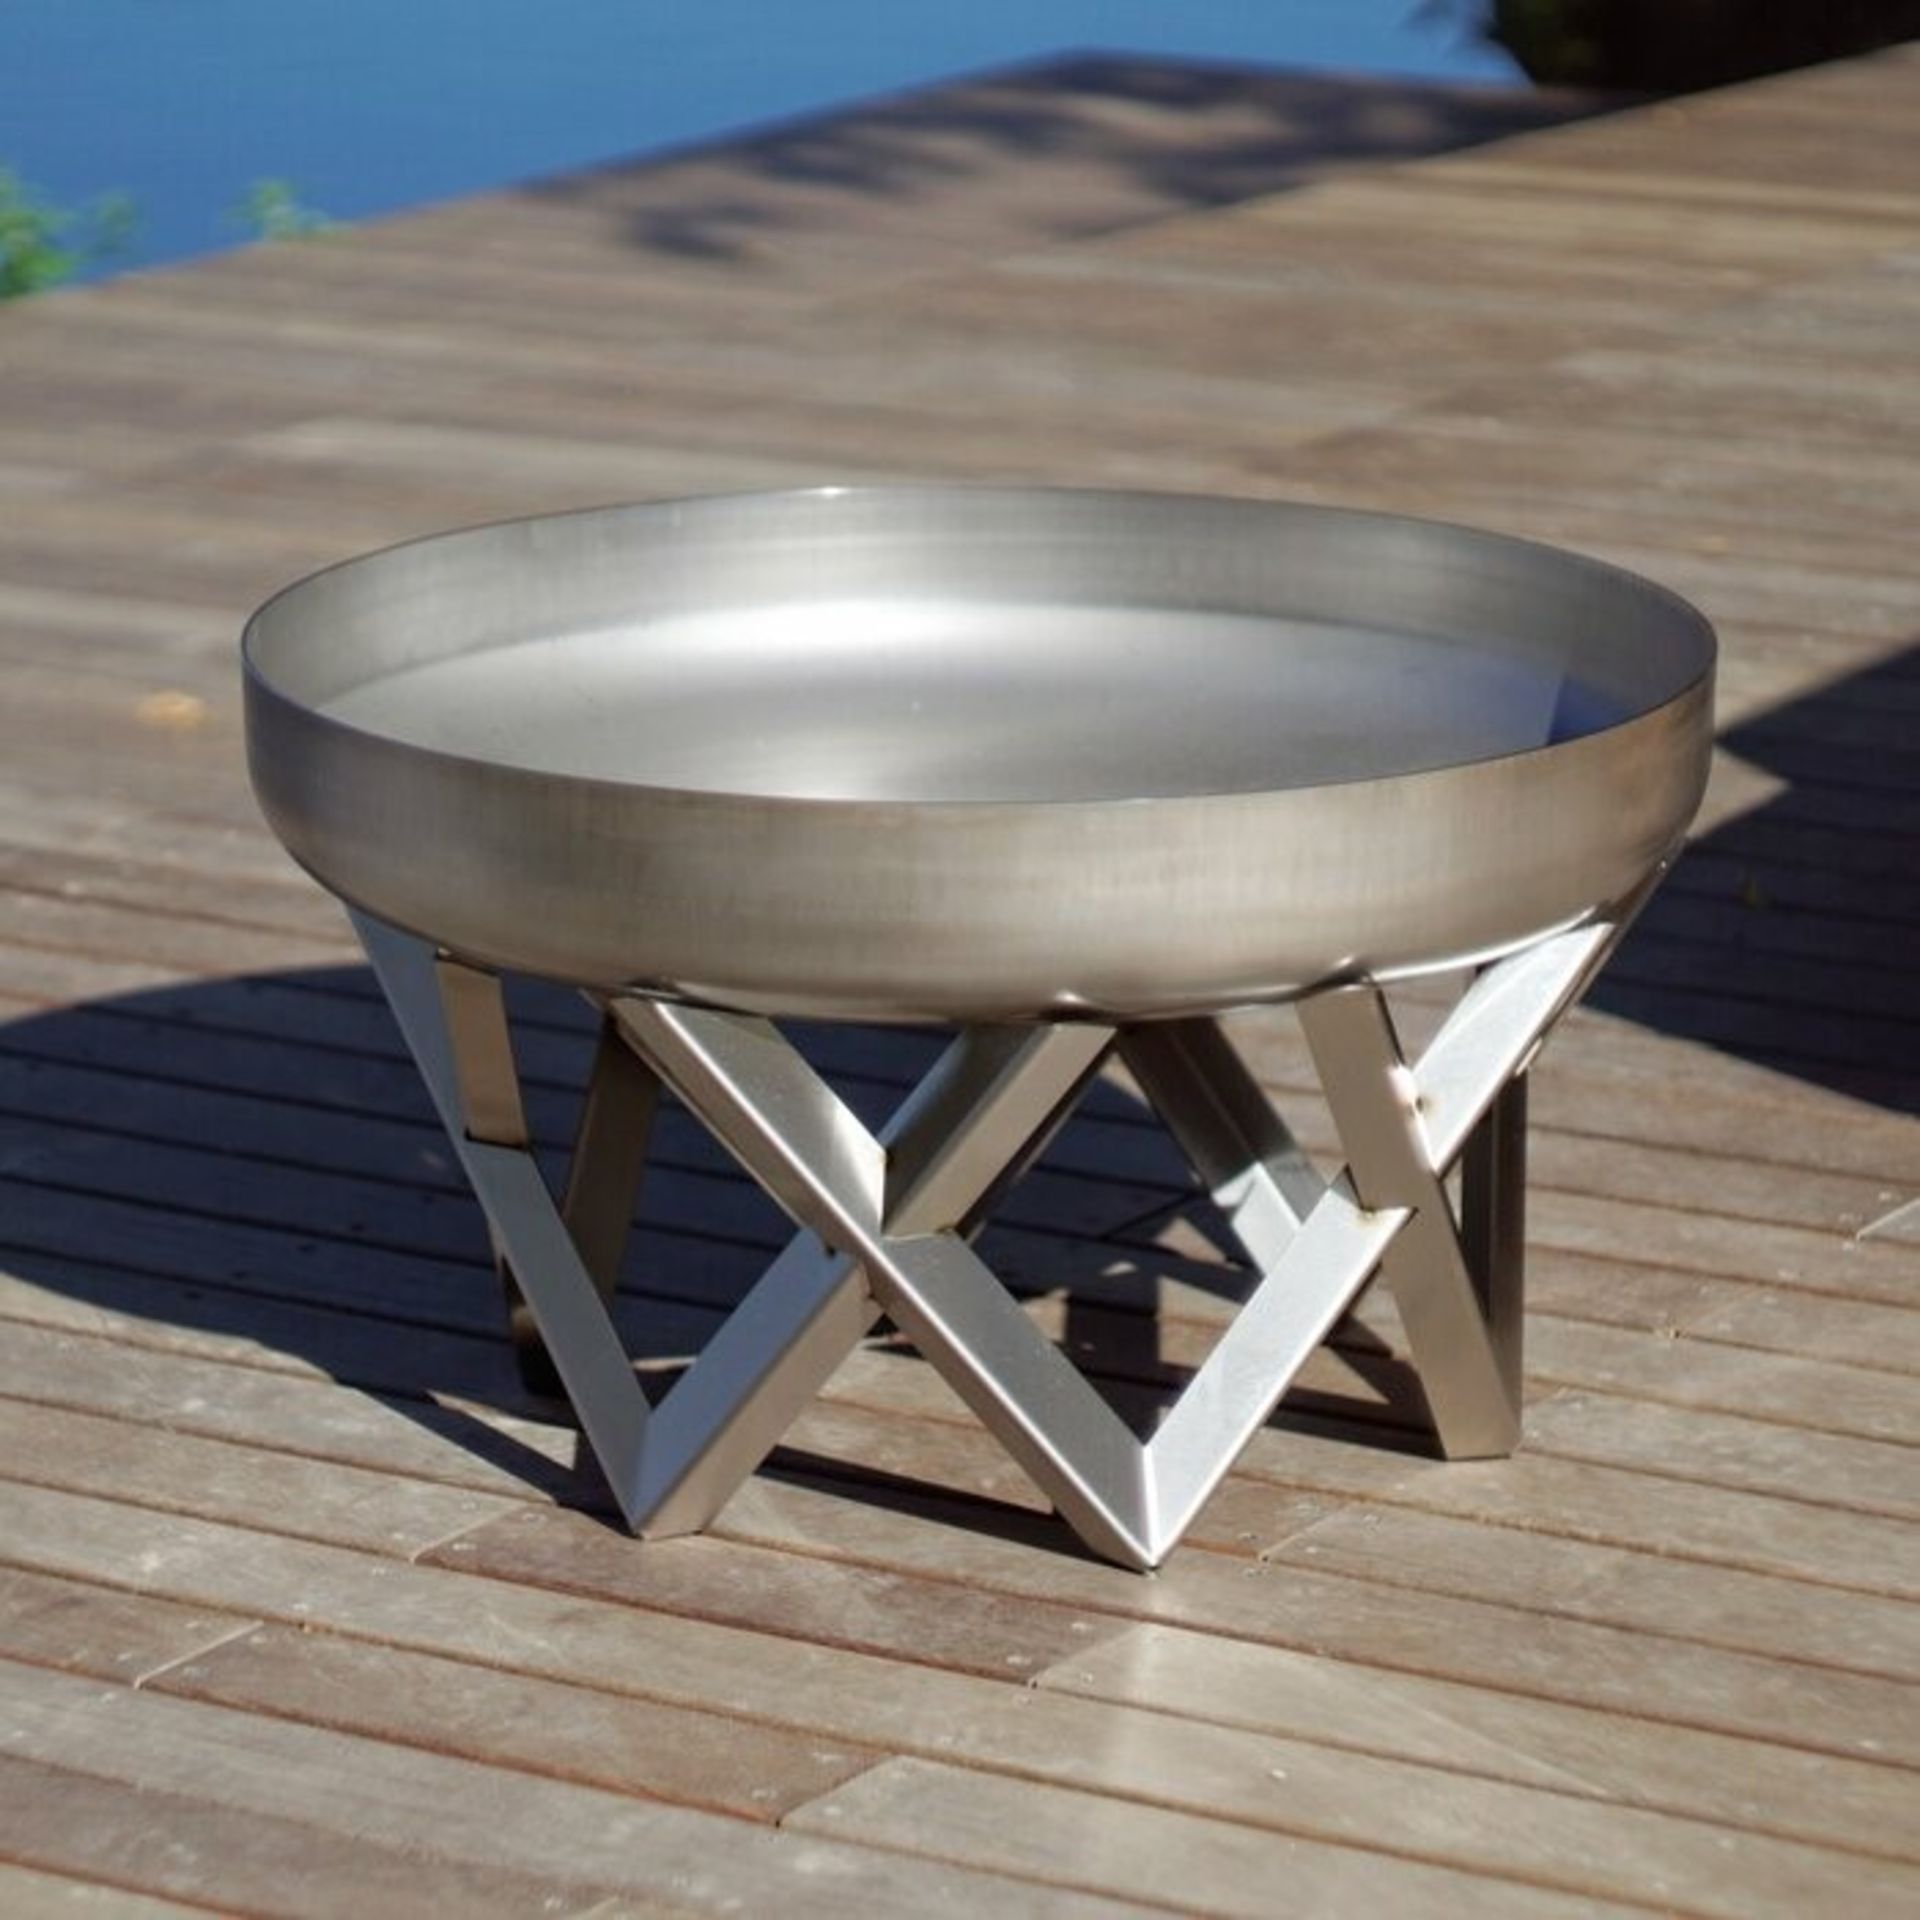 POND STAINLESS STEEL CHARCOAL/WOOD BURNING FIRE PIT BY DAKOTA FIELDS